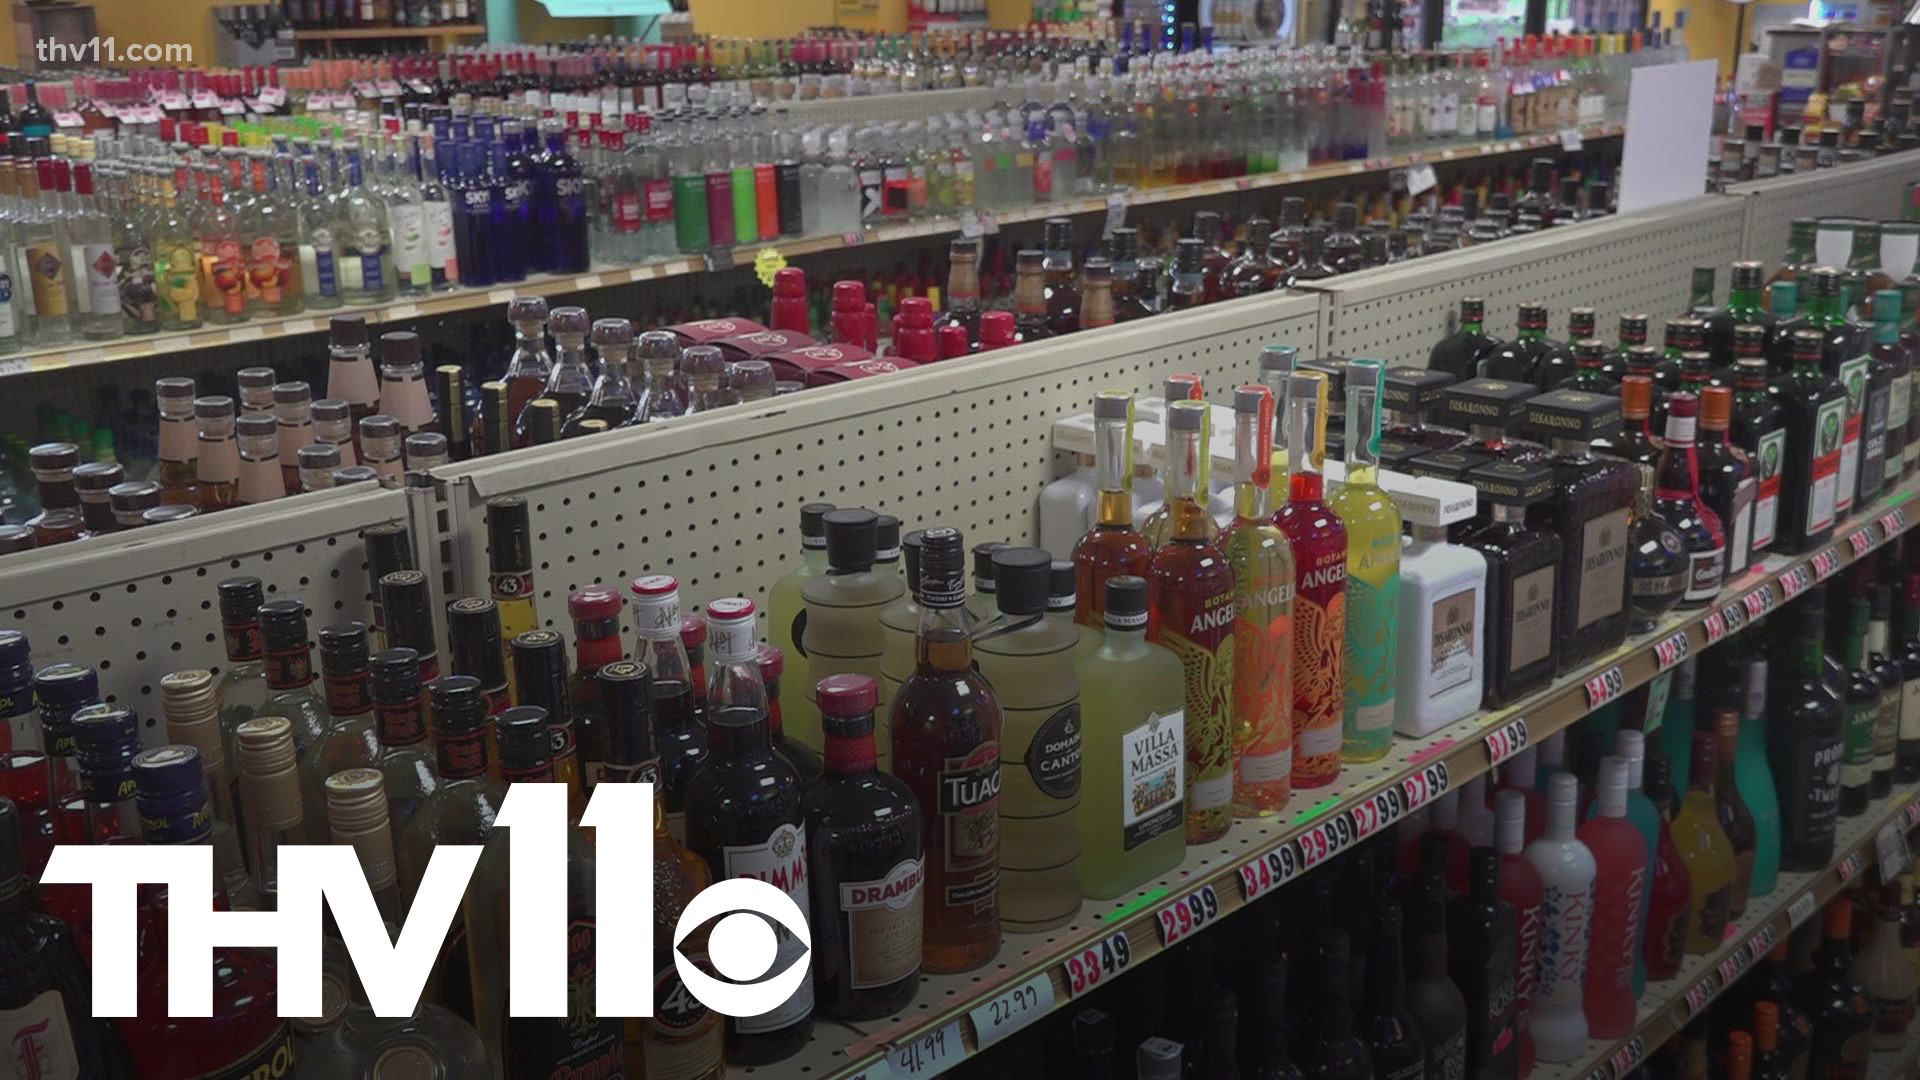 As the pandemic continues, there are more and more shortages, with alcohol being no exception.